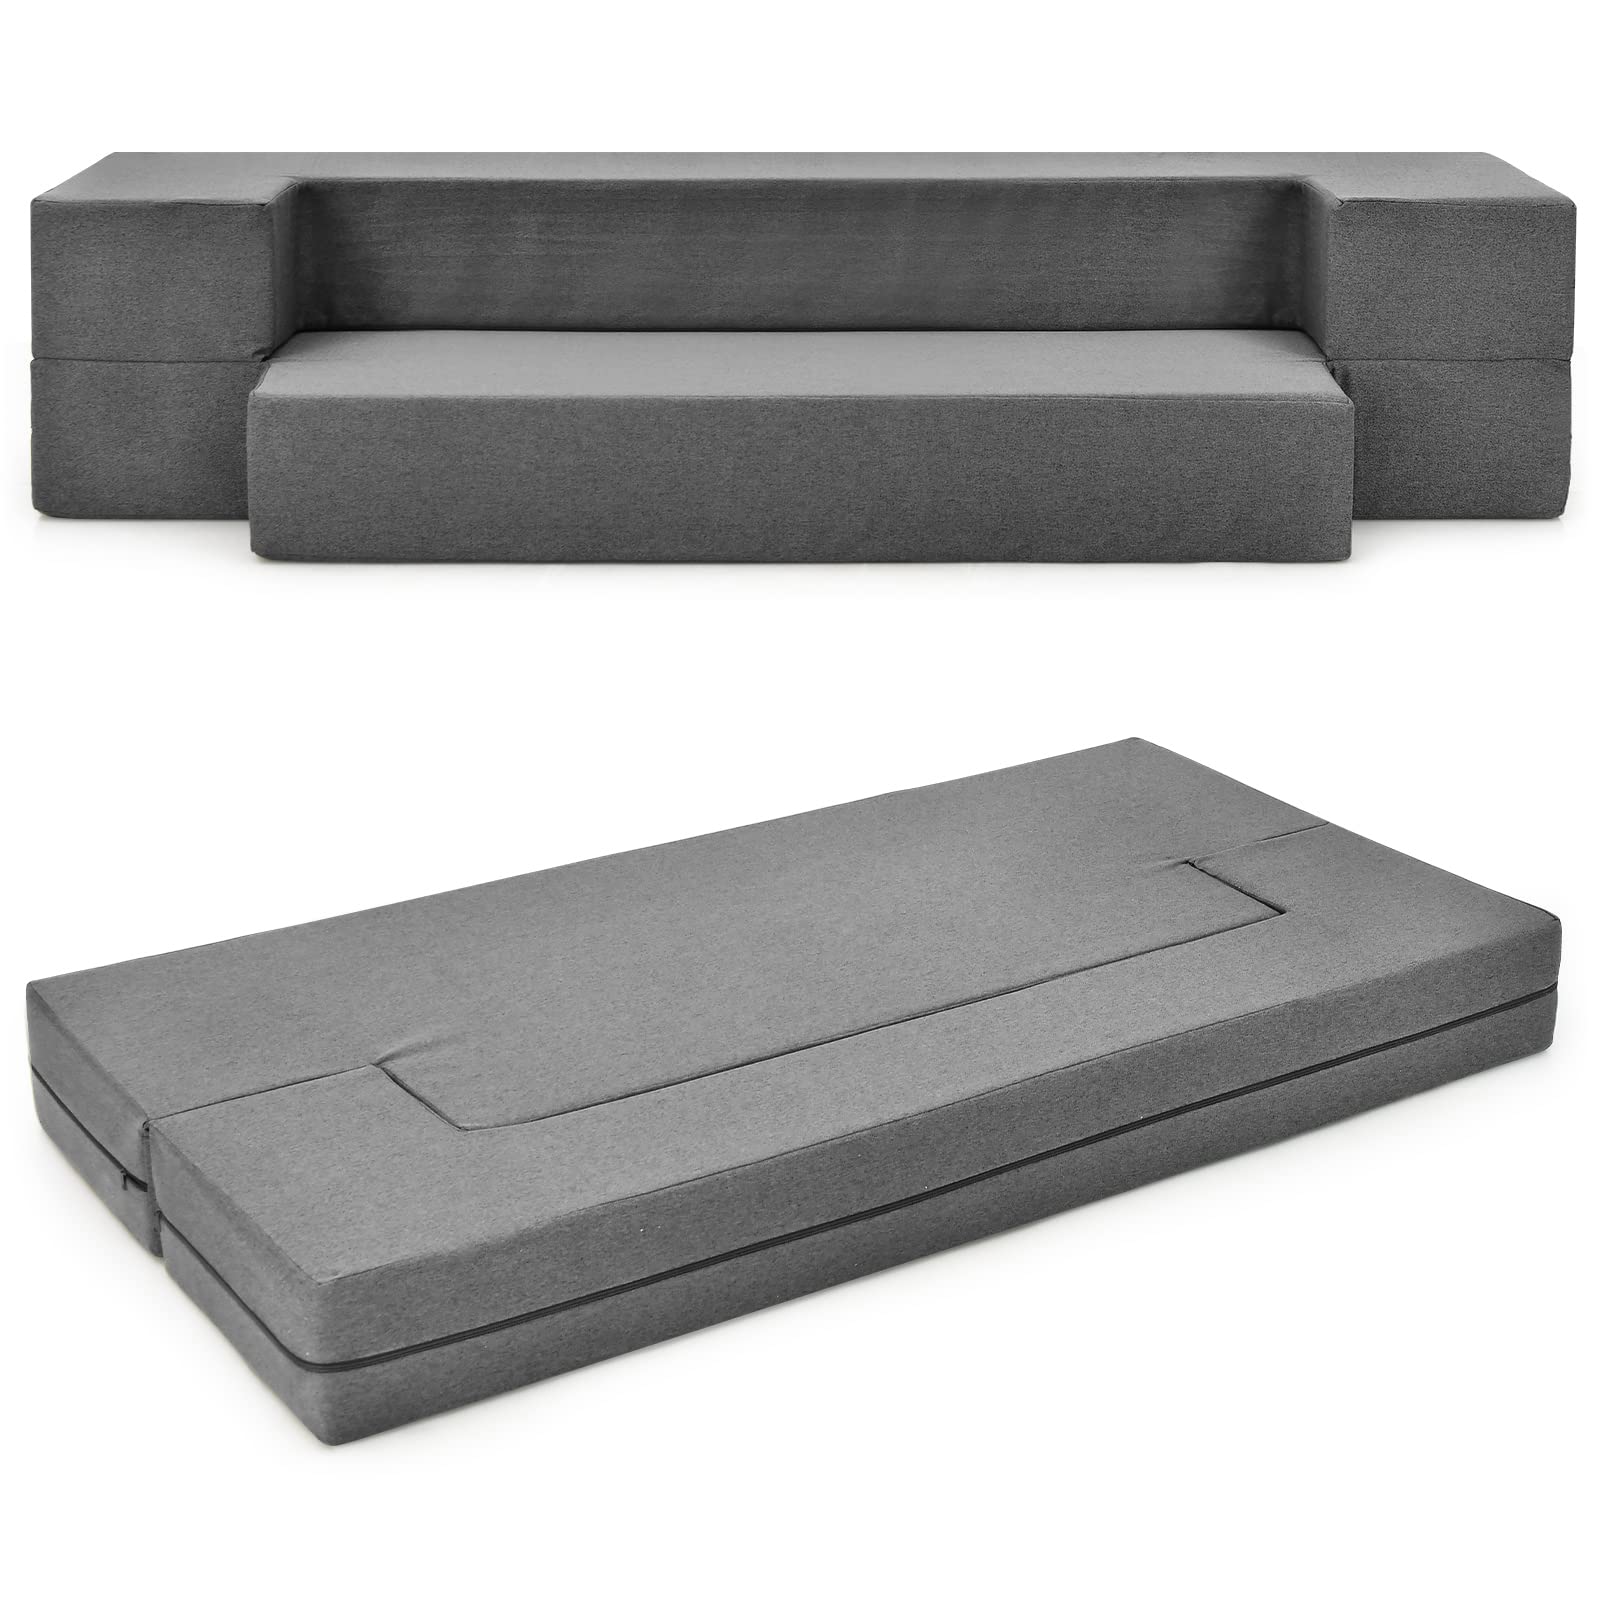 60 Fold Sofa Bed Couch Memory Foam Futon Sleeper Chair Guest Bed Queen  Gray